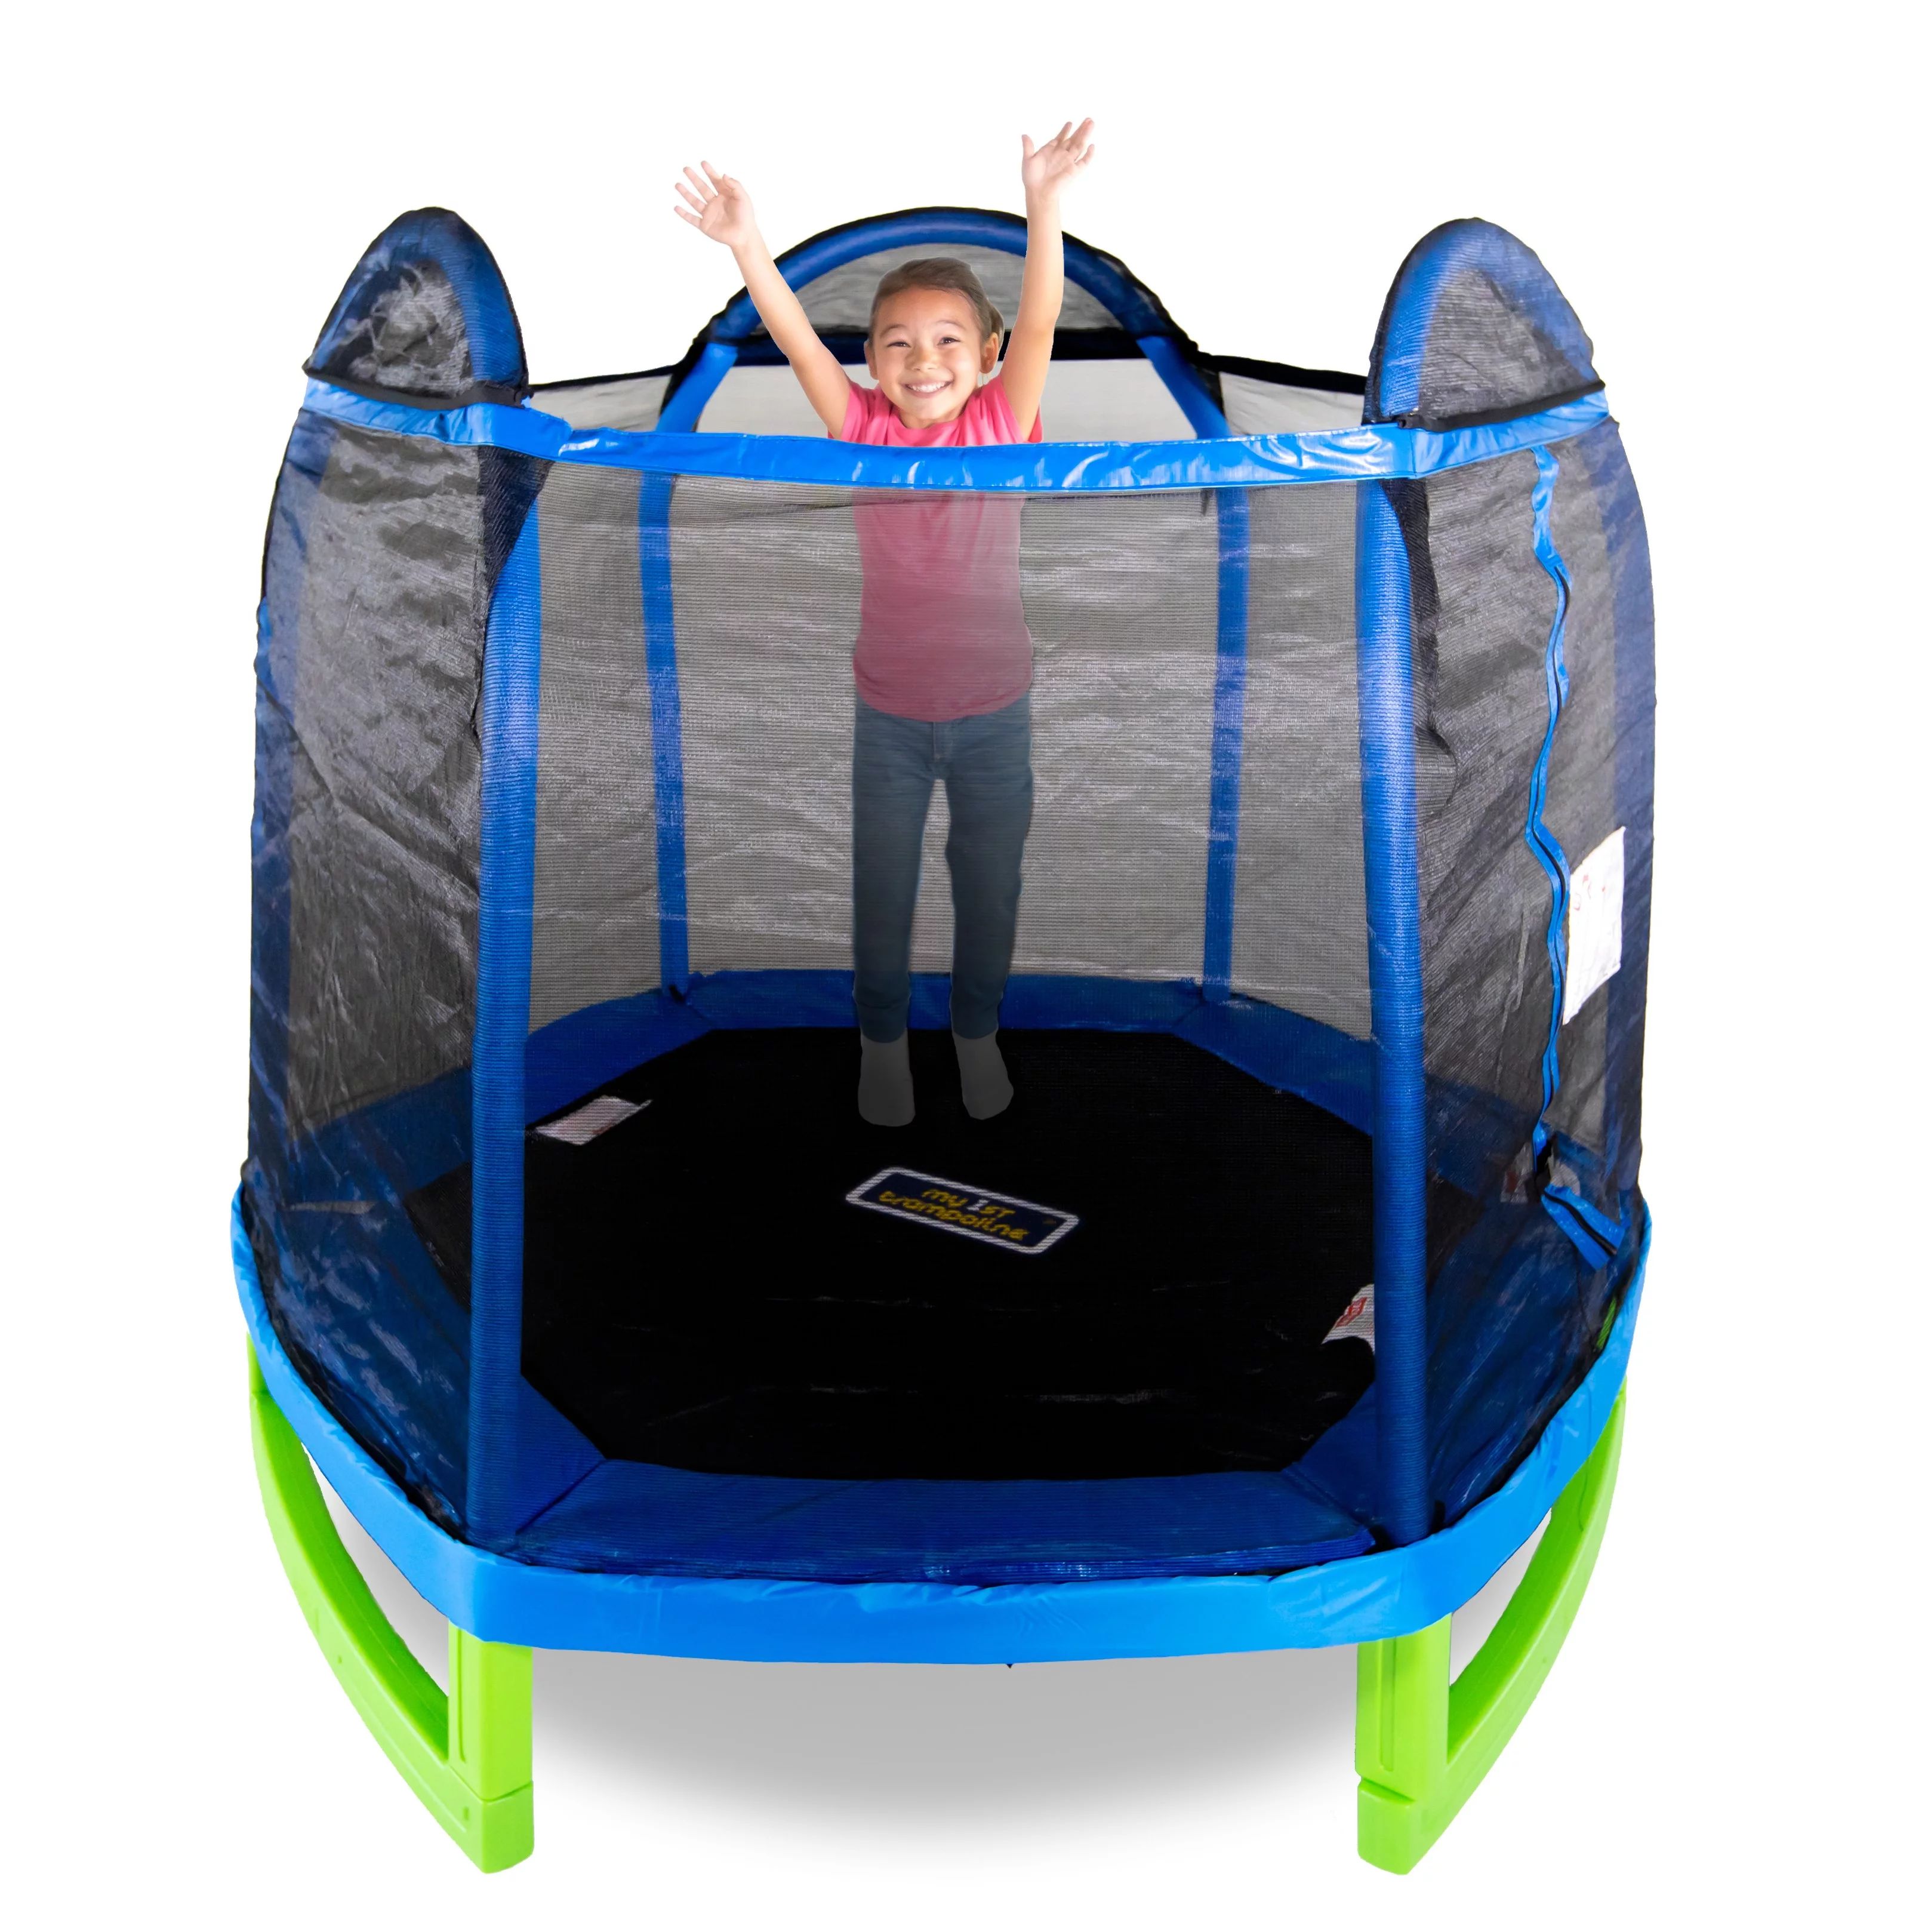 Bounce Pro 7-Foot My First Trampoline Hexagon (Ages 3-10) for Kids, Blue/Green | Walmart (US)